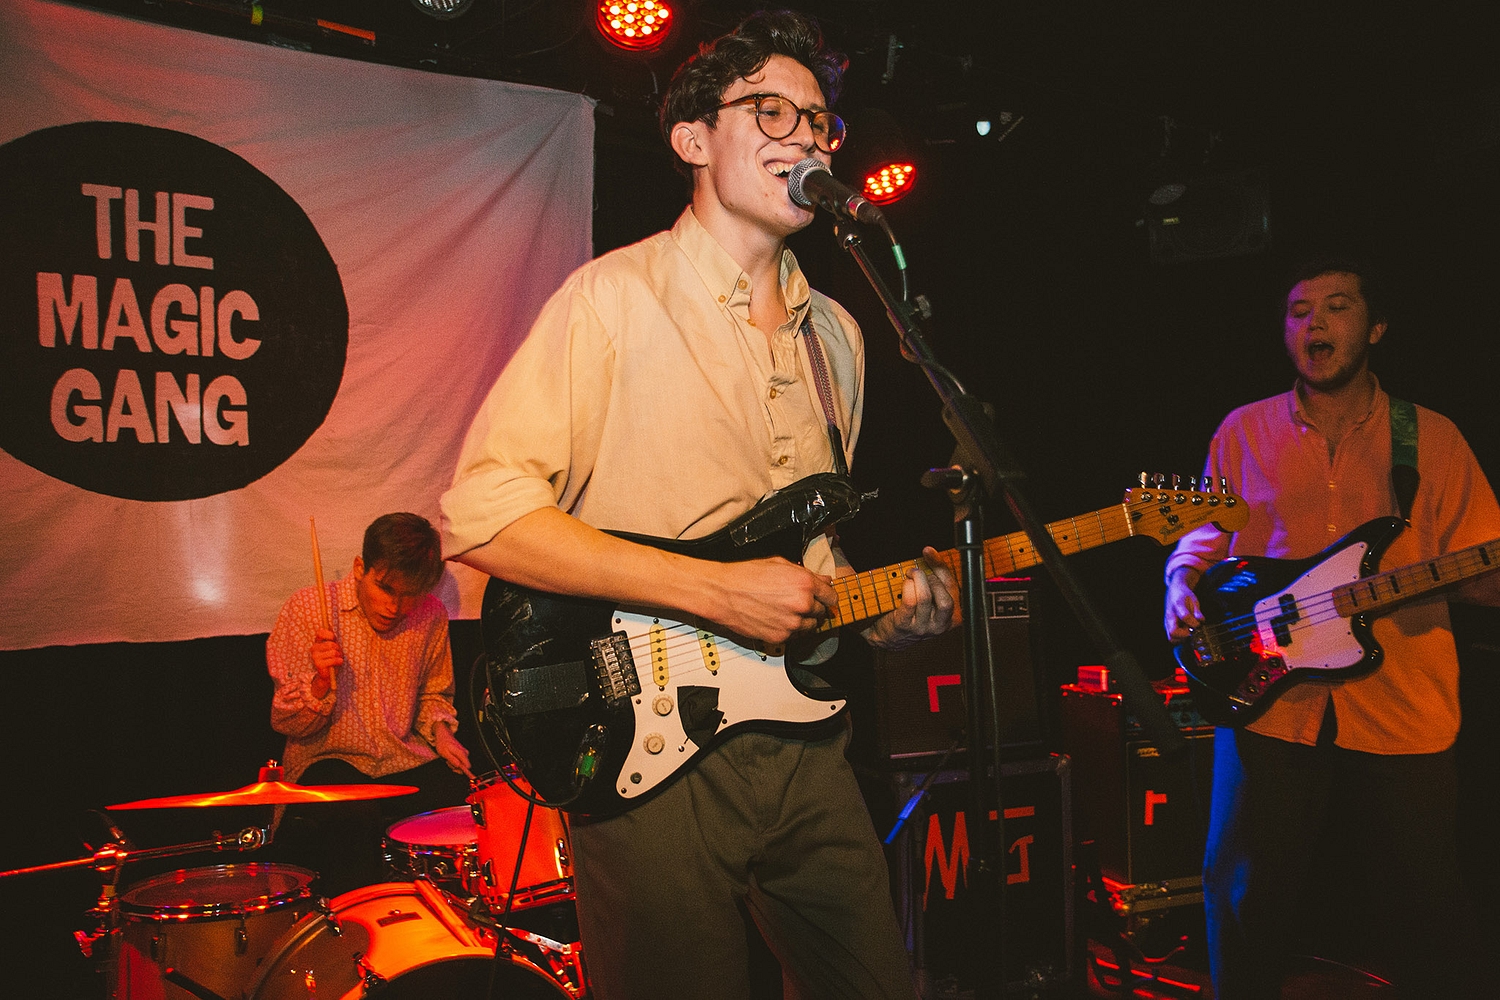 The Magic Gang give glimpses of a blindingly bright future at London’s Lexington